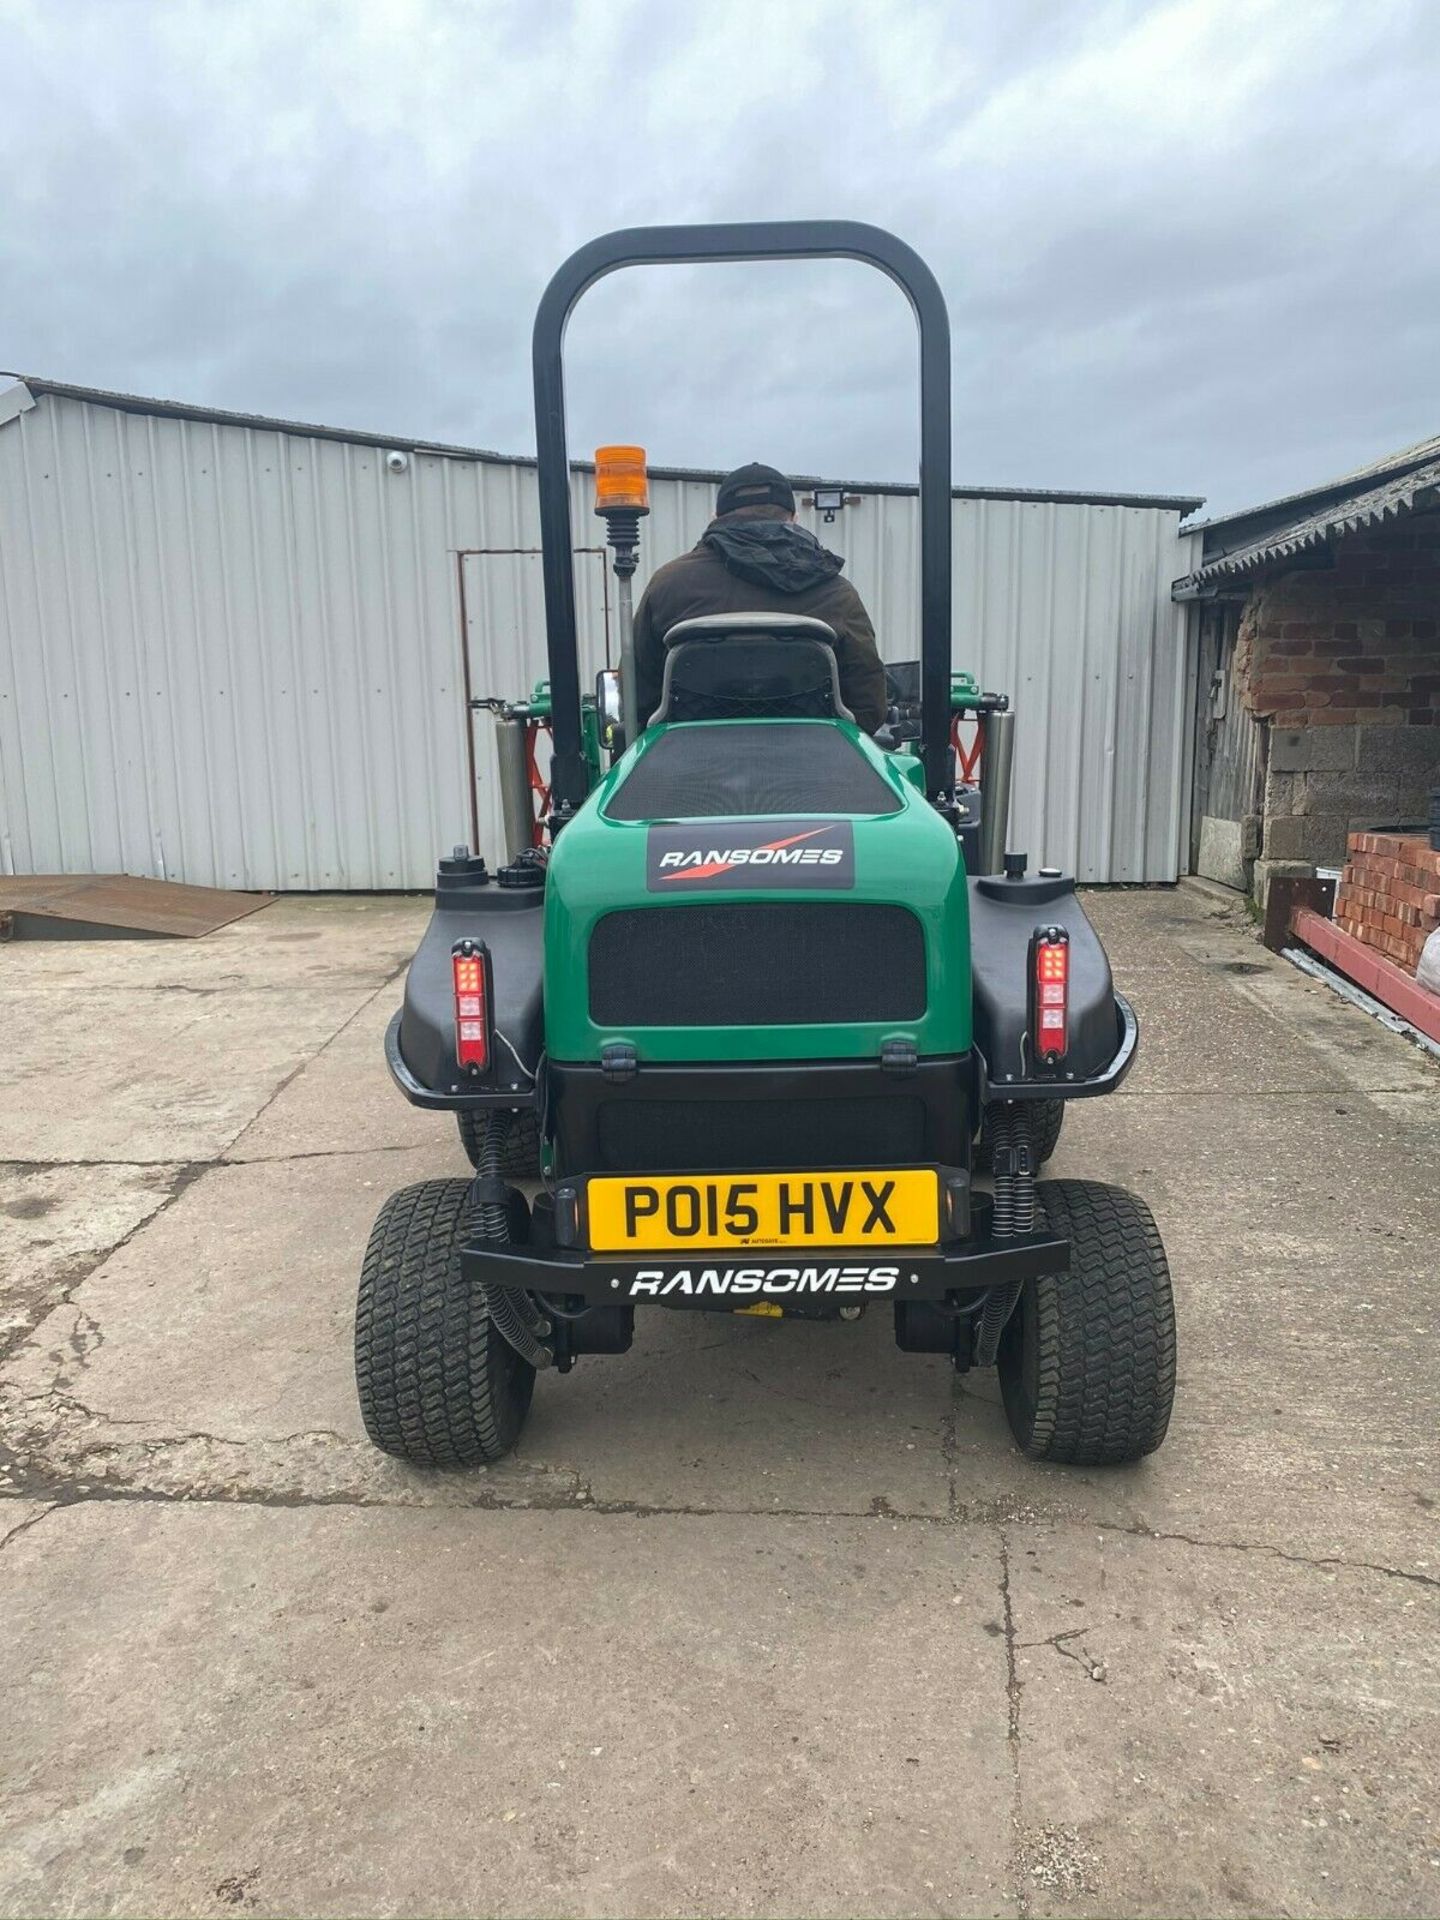 IMMACULATE! RANSOMES PARKWAY 3 TRIPLE CYLINDER MOWER, ONLY 953 HOURS, YEAR 2015, NEW CYLINDERS ETC - Image 5 of 10